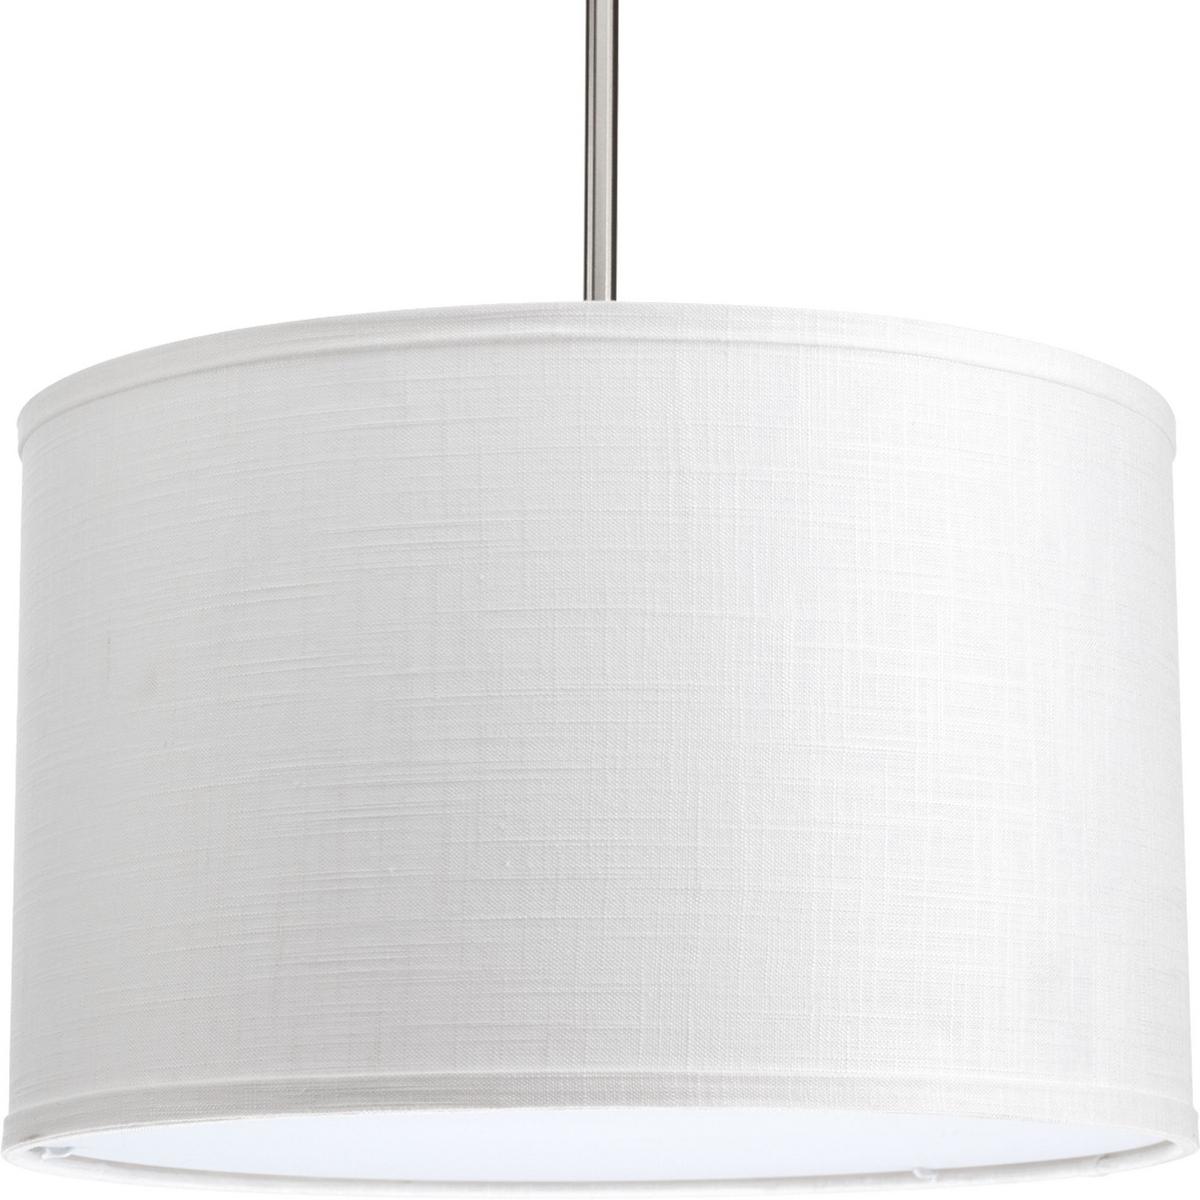 Hubbell P8829-30 The Markor Series is a modular pendant system. The versatile series allow the choice of shades and stem kits. This 16" shade with summer linen fabric is inspired by mid-century design. Acrylic bottom diffuser. This shade can be used with a variety of stem